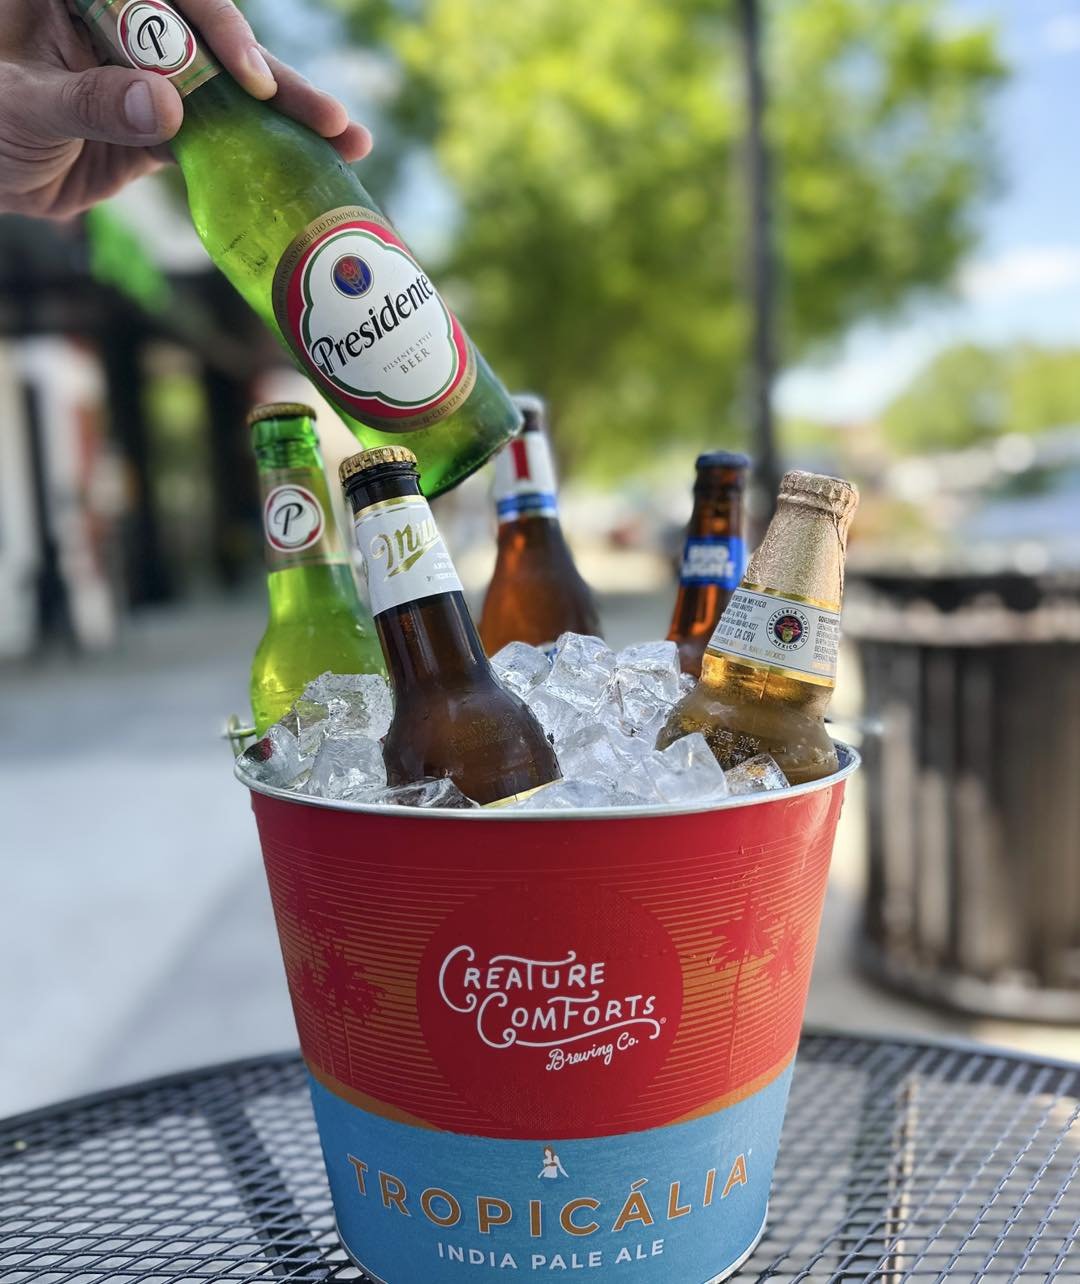 🍻 Introducing Beer Buckets at Pineapple Ink Tavern! Grab five beers for just $15 (domestic) or $17 (imports) today! Cheers to good times ahead! 🍻 

#BeerBuckets #PineappleInkTavern #DrinkSpecials